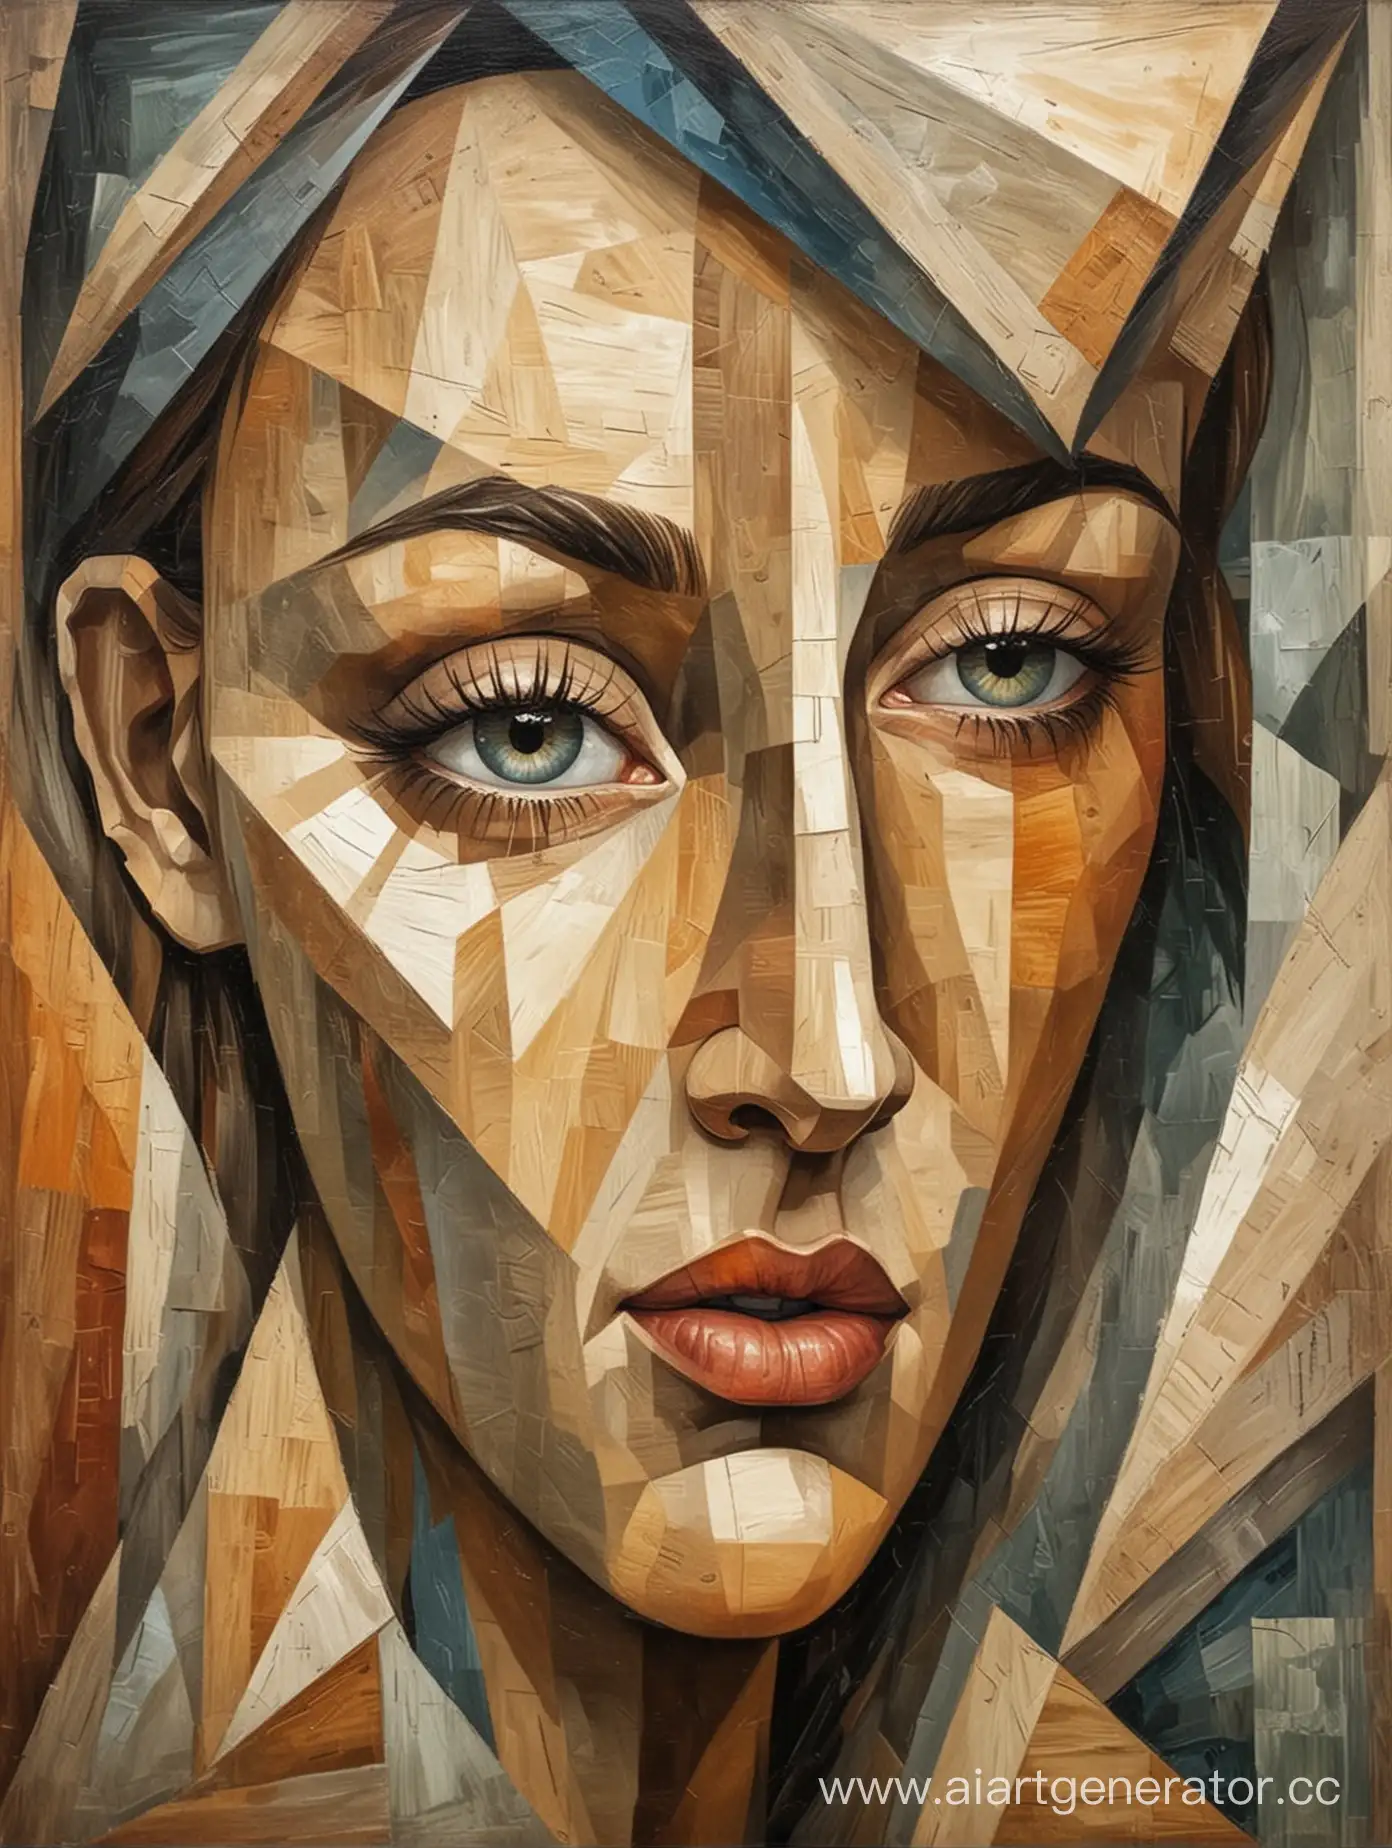 Abstract-Cubist-Portrait-Obscured-Facial-Features-in-Subdued-Tones